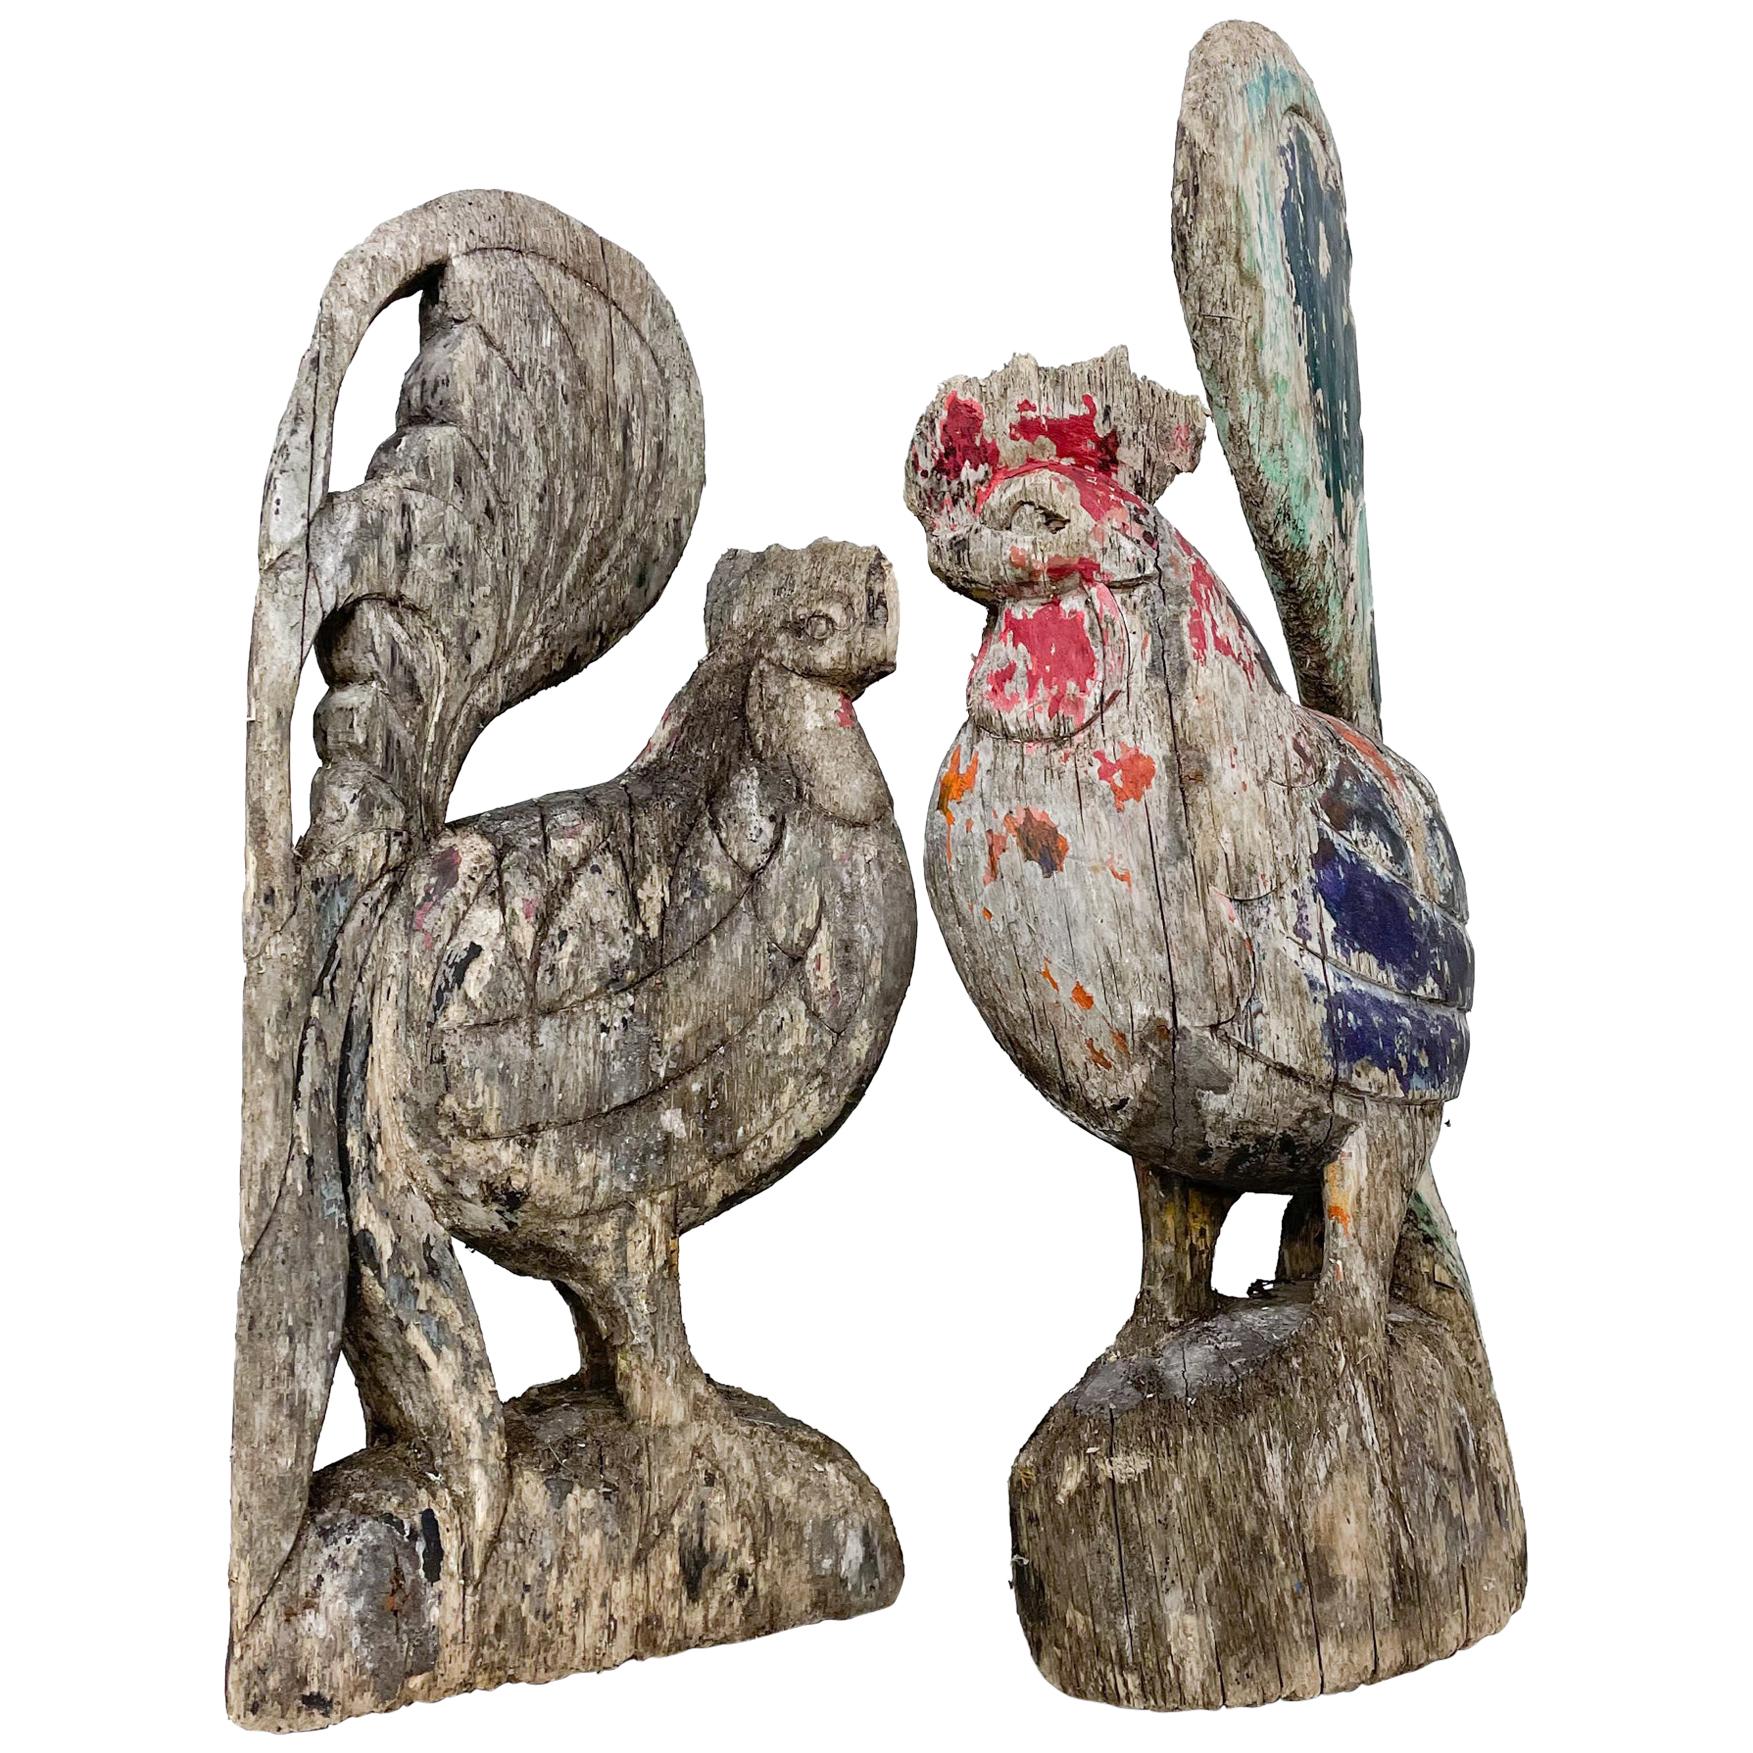 Antique French Country Wooden Rooster Sculptures